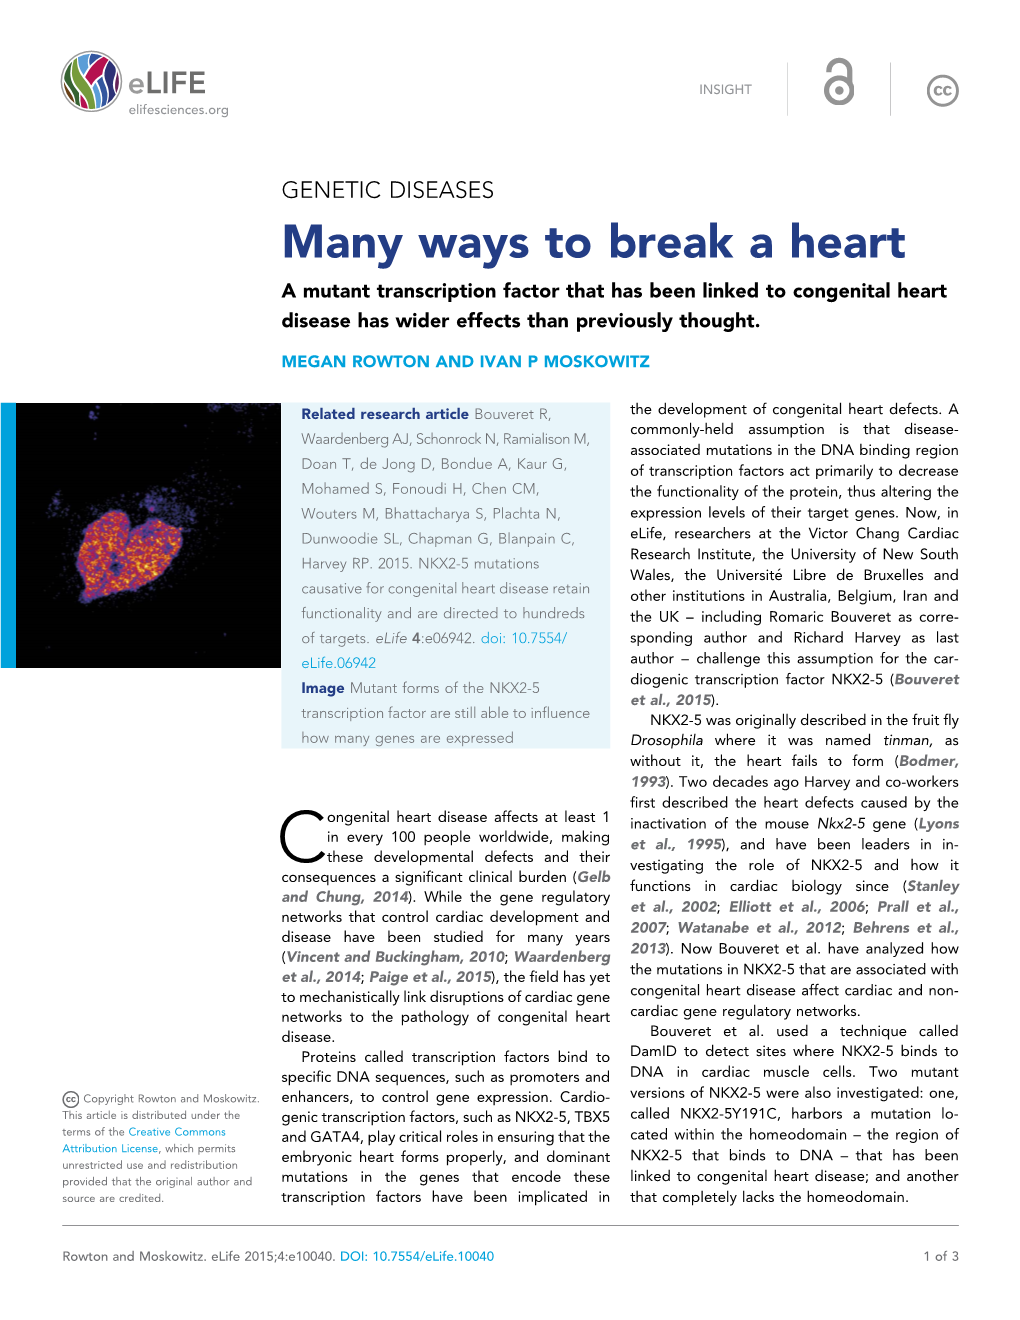 Many Ways to Break a Heart a Mutant Transcription Factor That Has Been Linked to Congenital Heart Disease Has Wider Effects Than Previously Thought